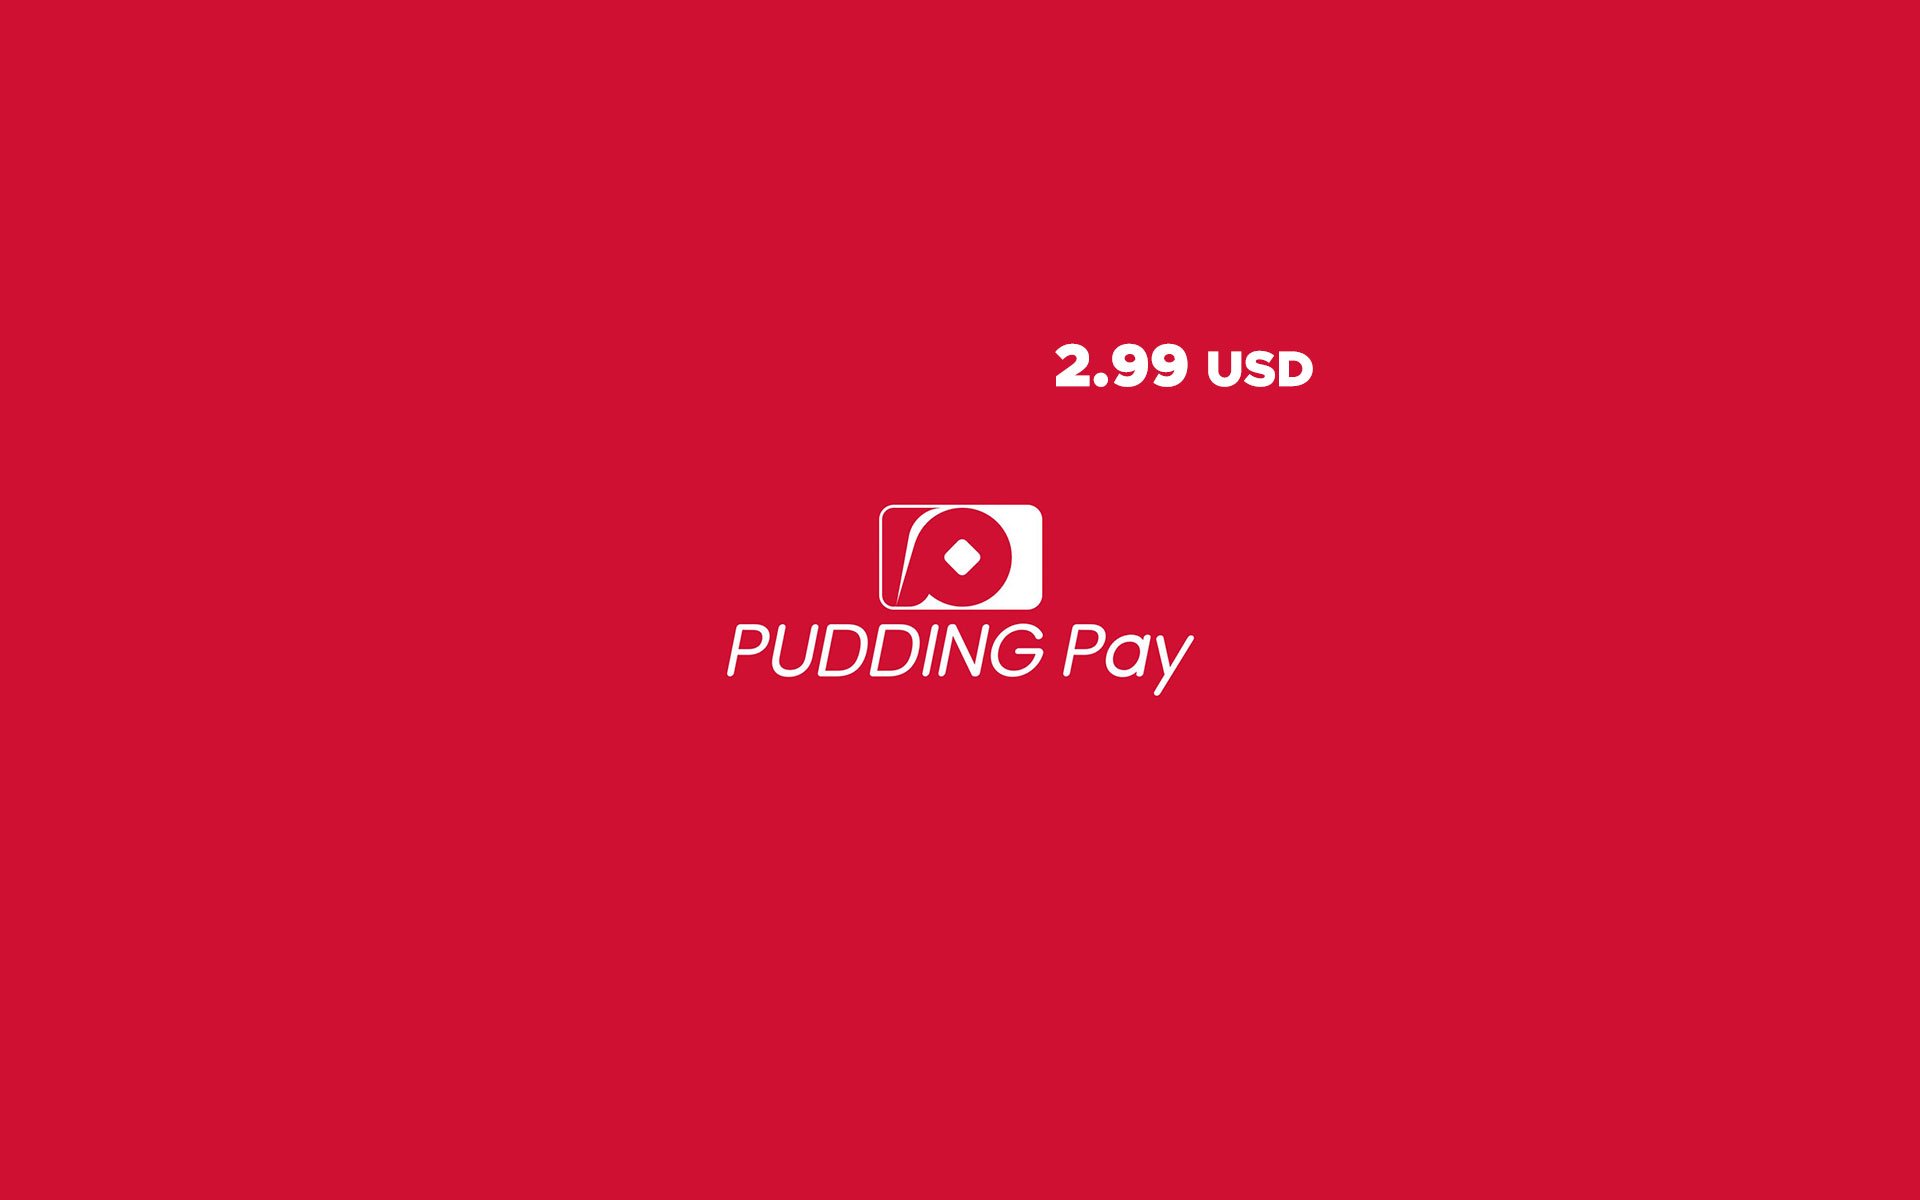 2.99 USD Pudding Pay cover